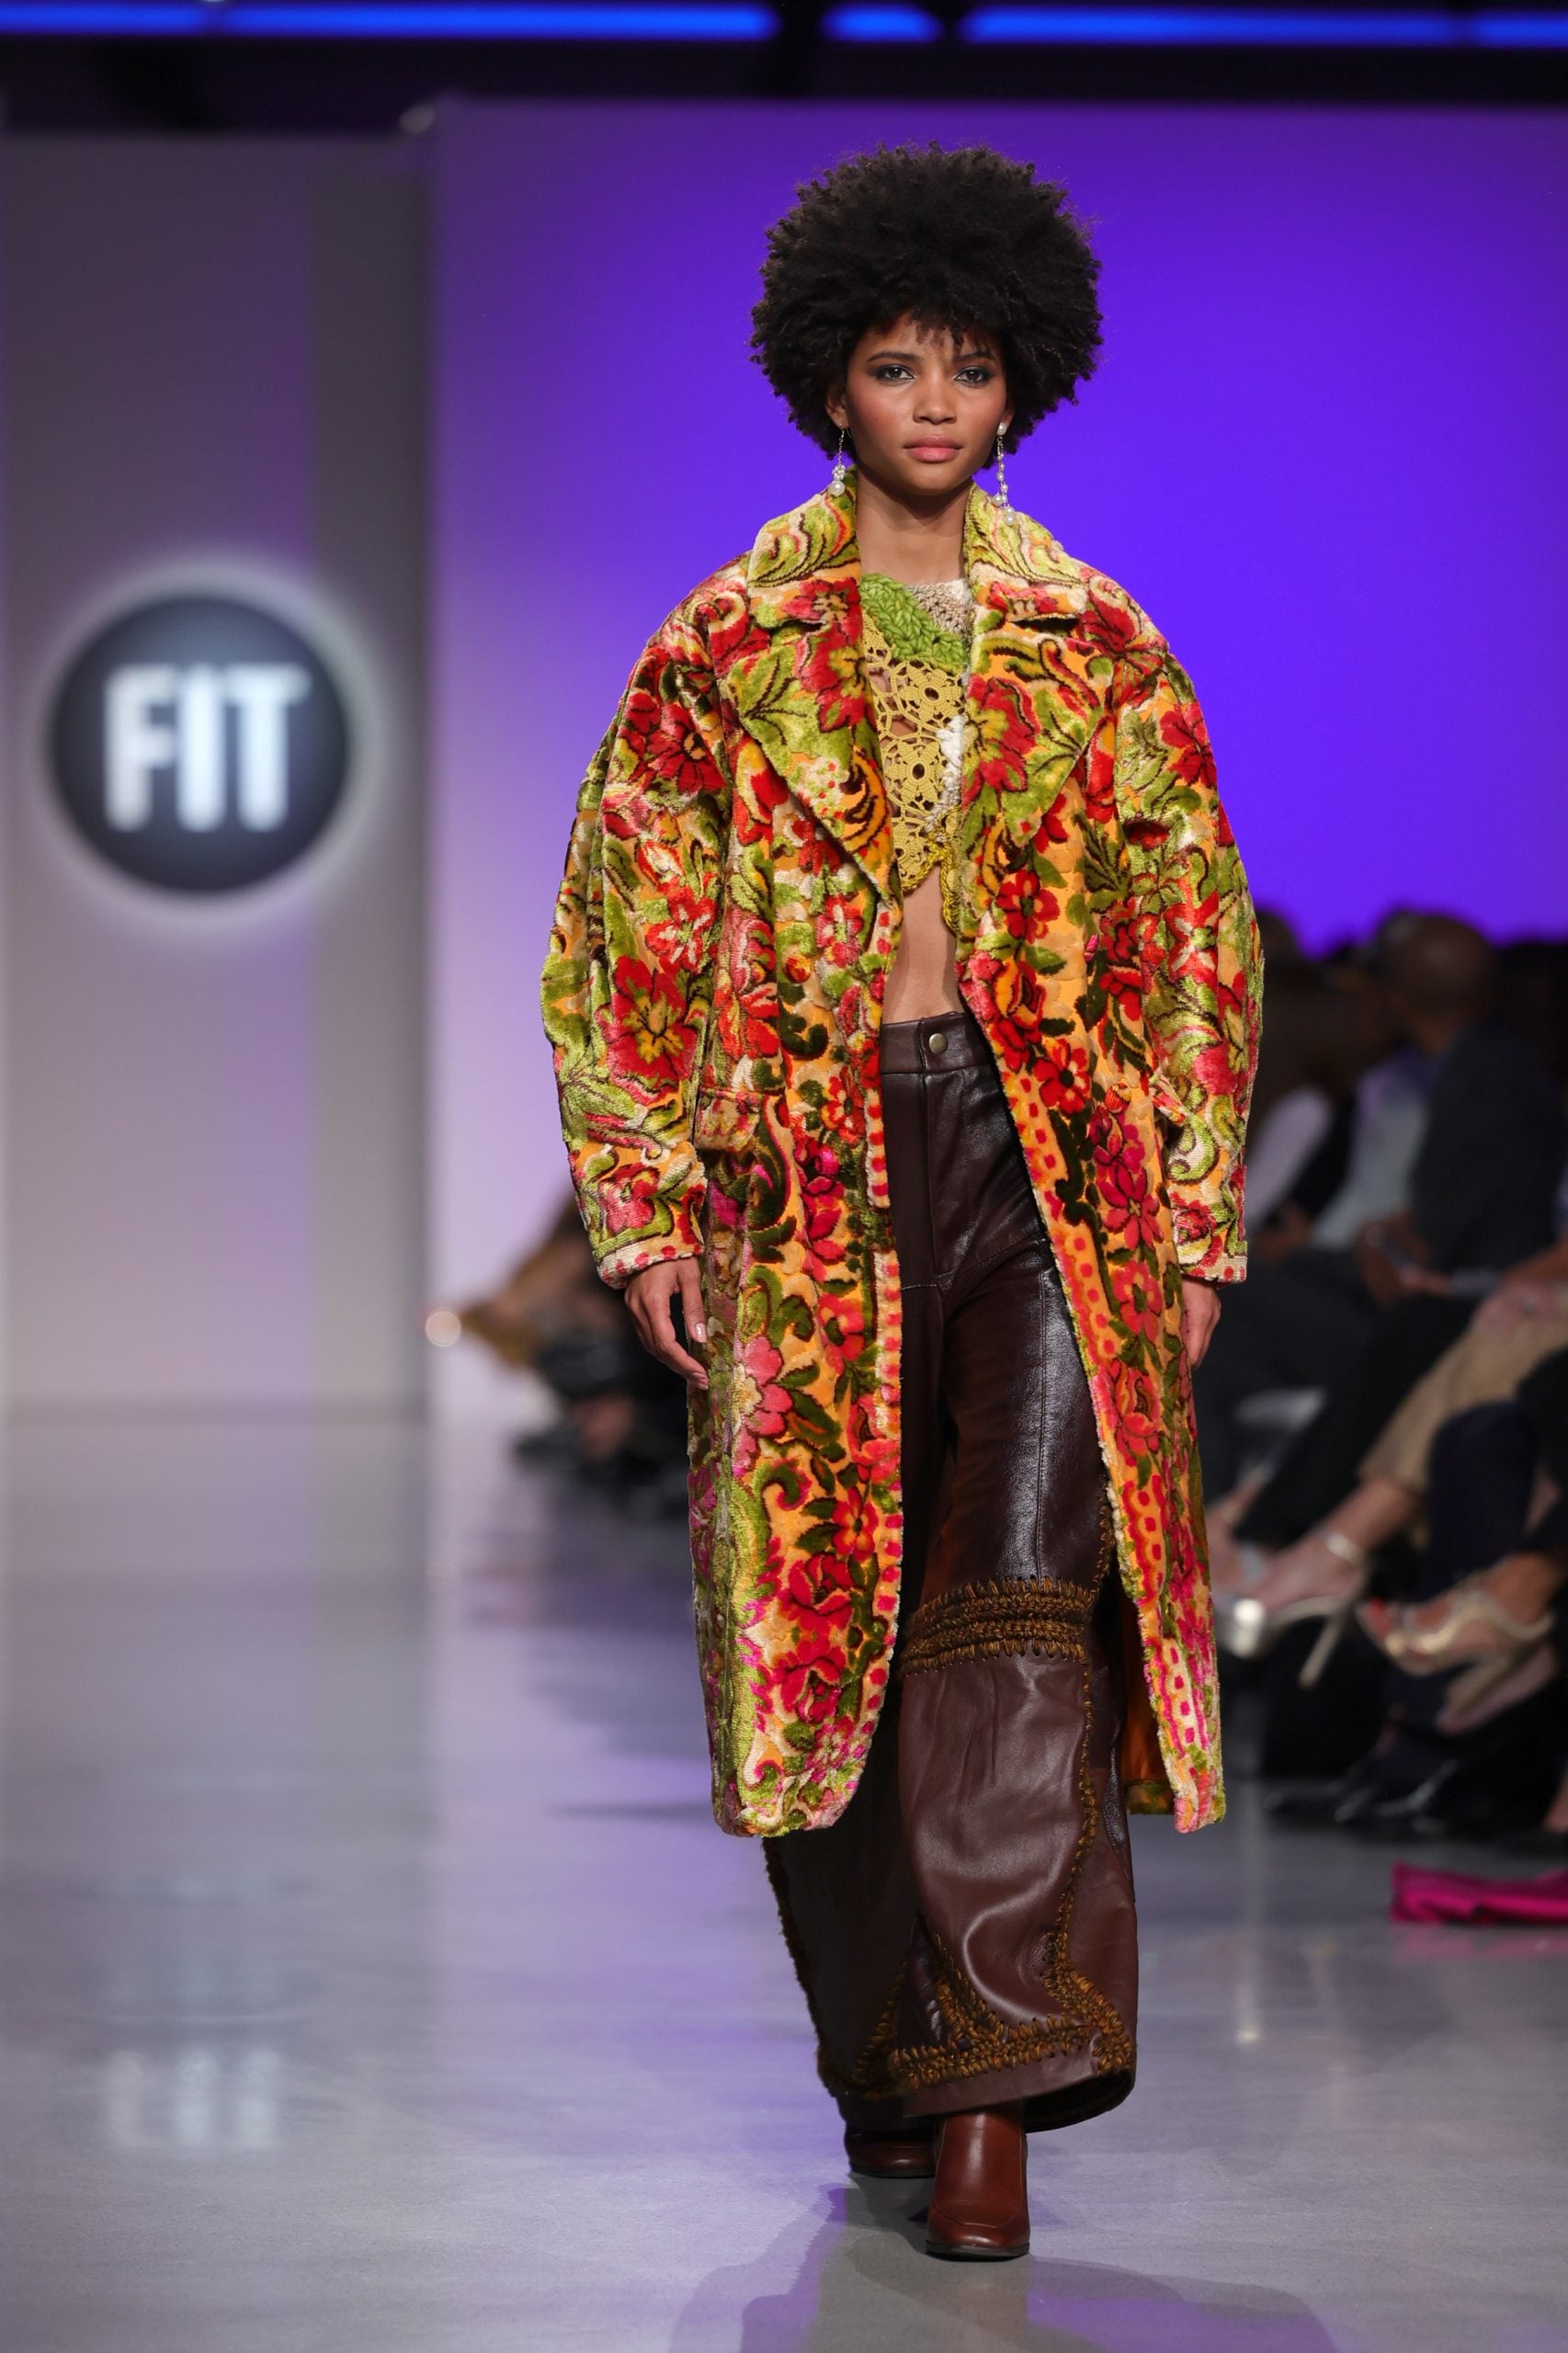 The Top Moments At FIT’s Future Of Fashion Show And Gala